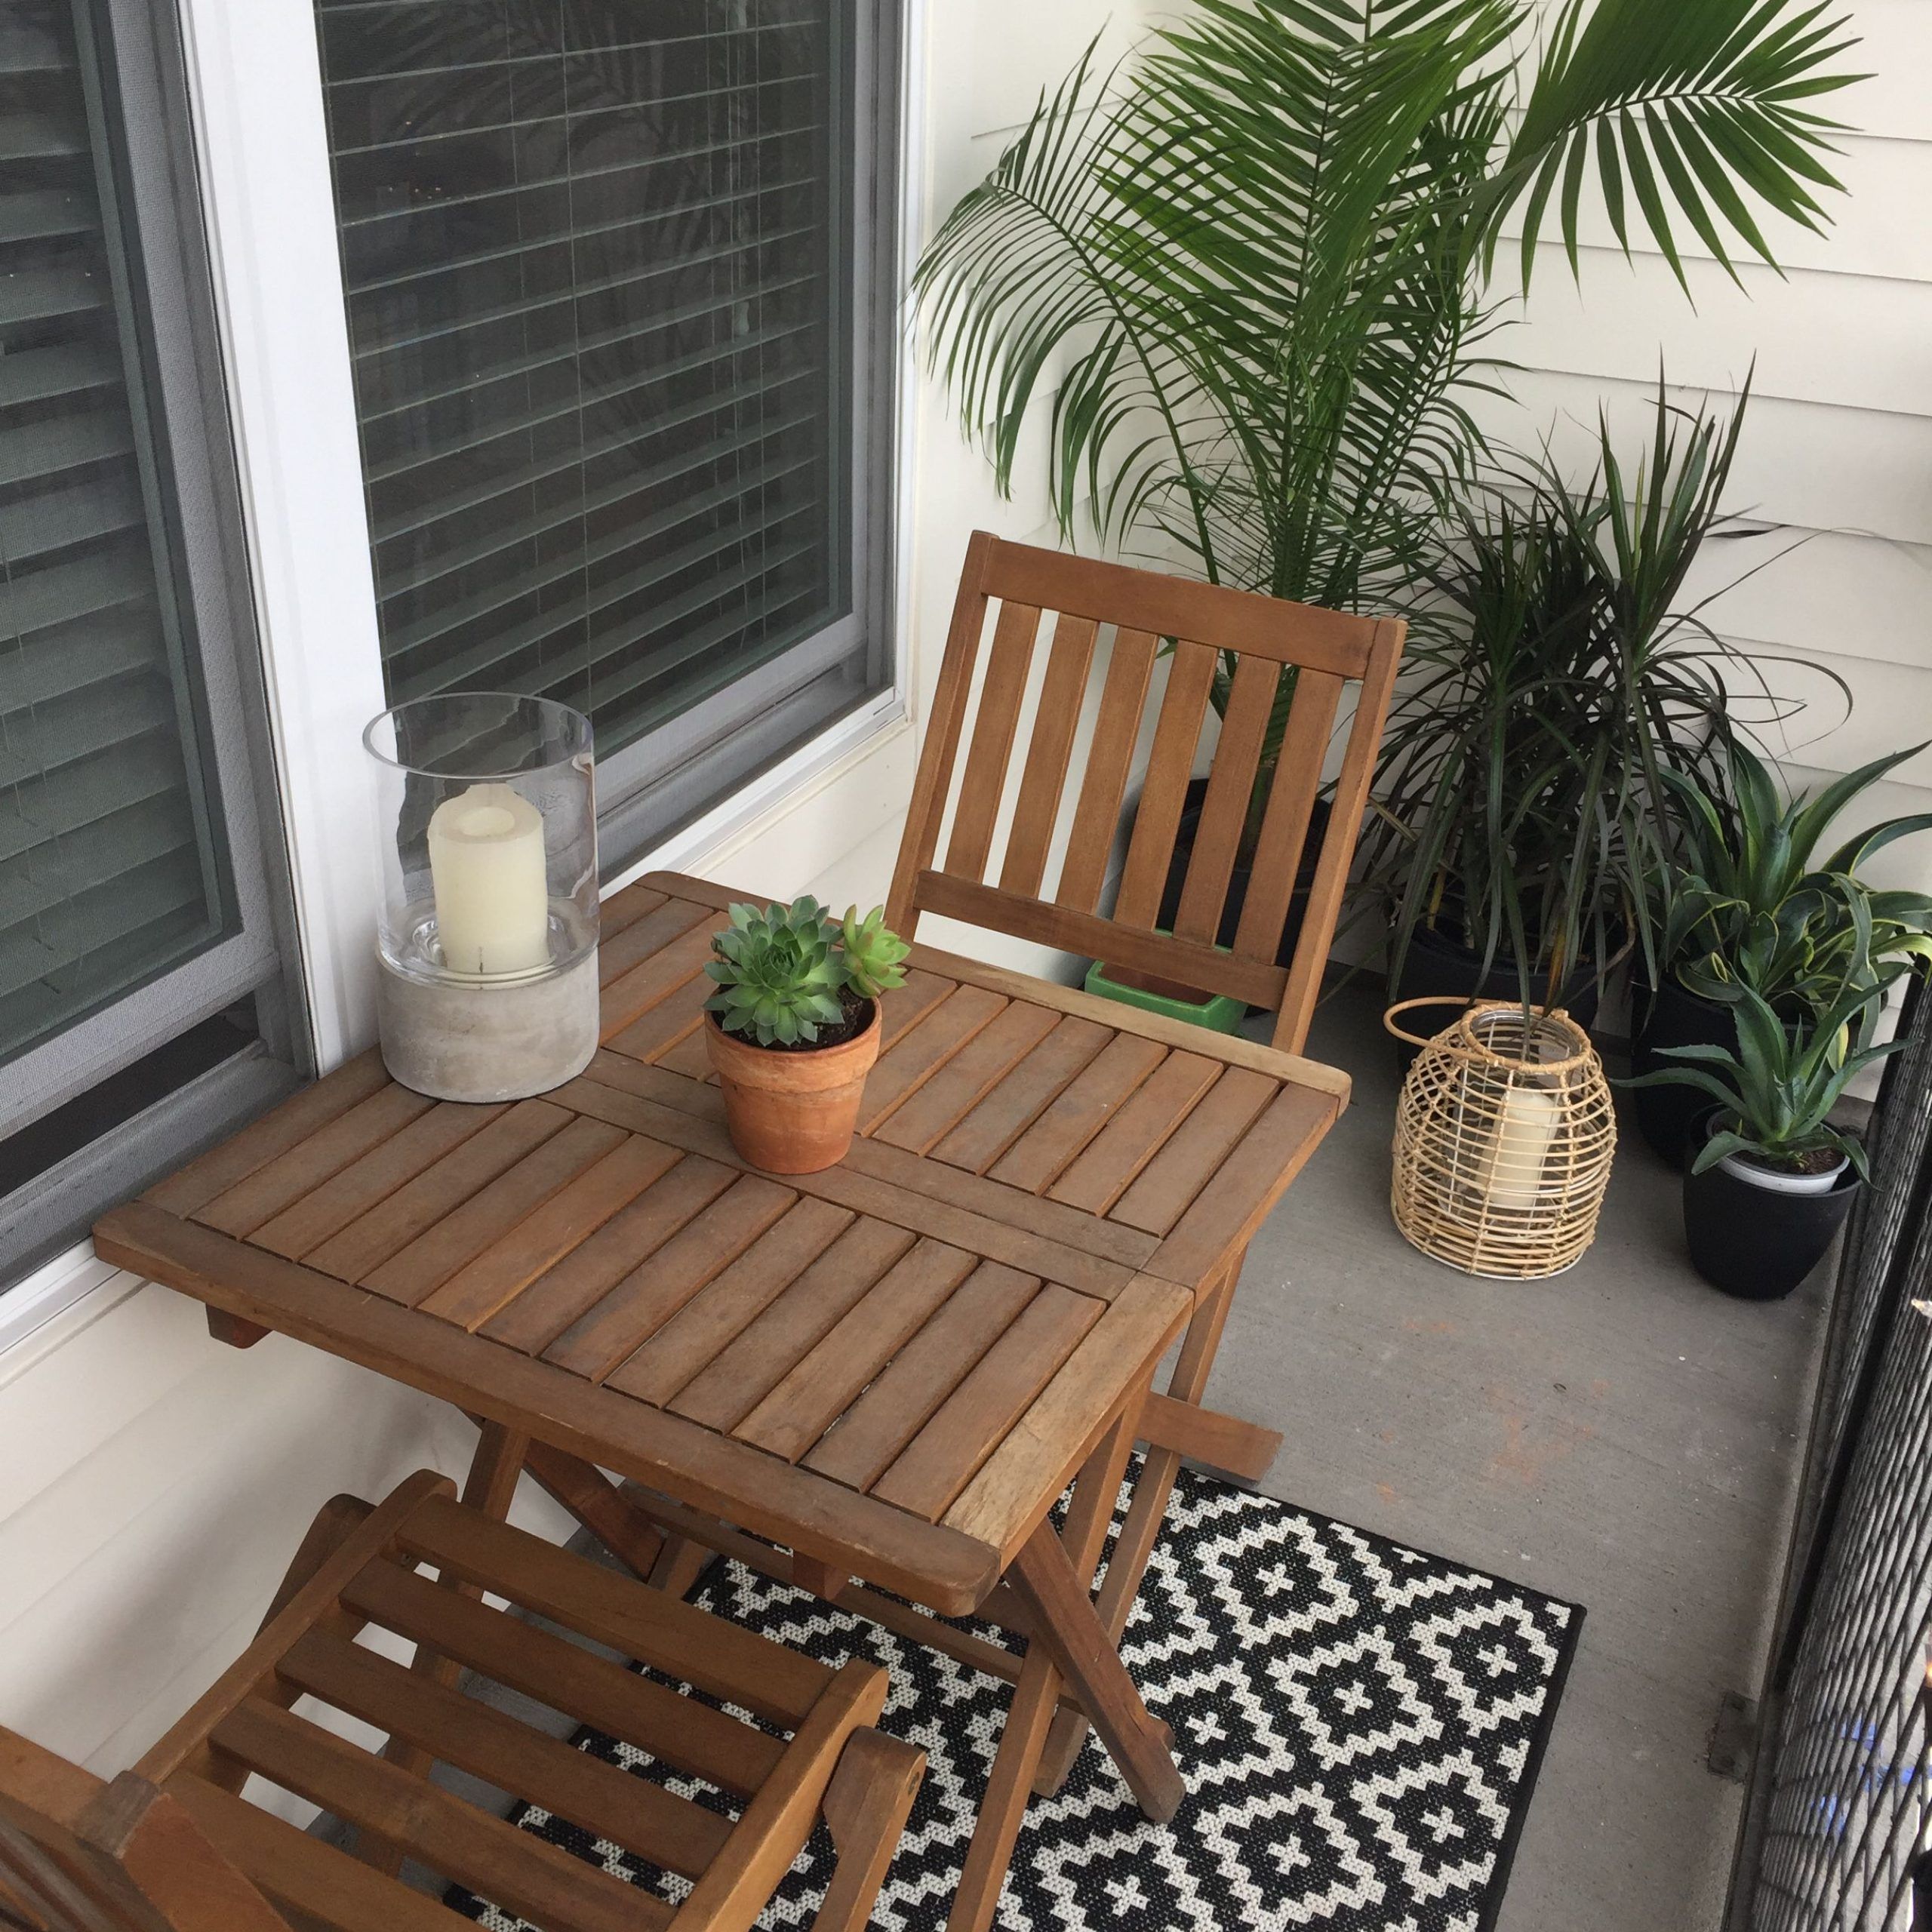 Small Balcony Design And Decor Ideas. Balcony Garden. Target And World Regarding Coffee Tables For Balconies (Gallery 16 of 20)